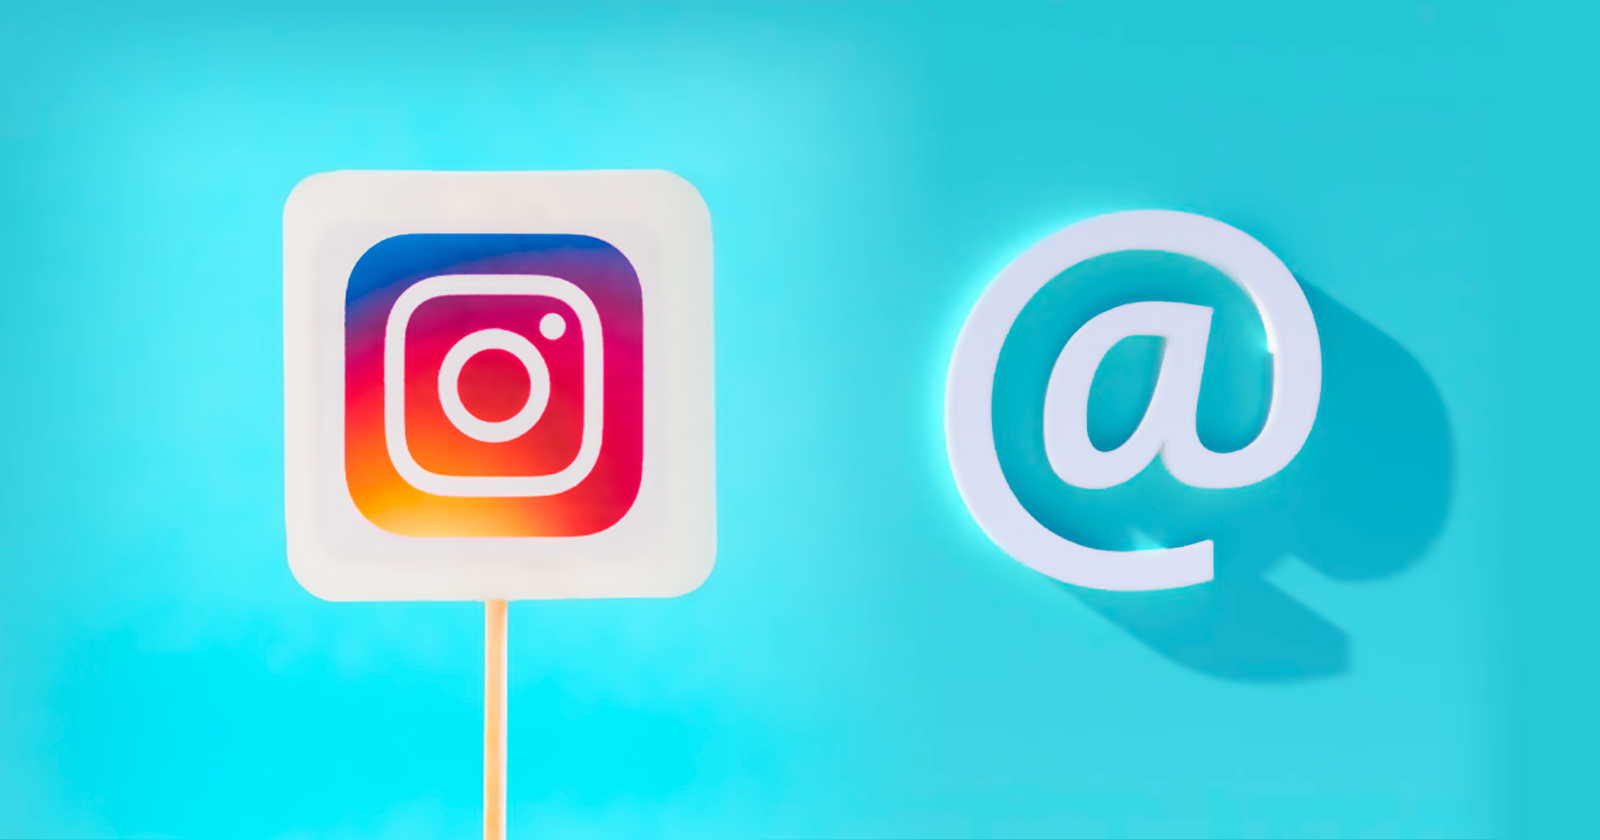 How to Get Verified on Instagram (for Free) - The Latest Analysis & Advice